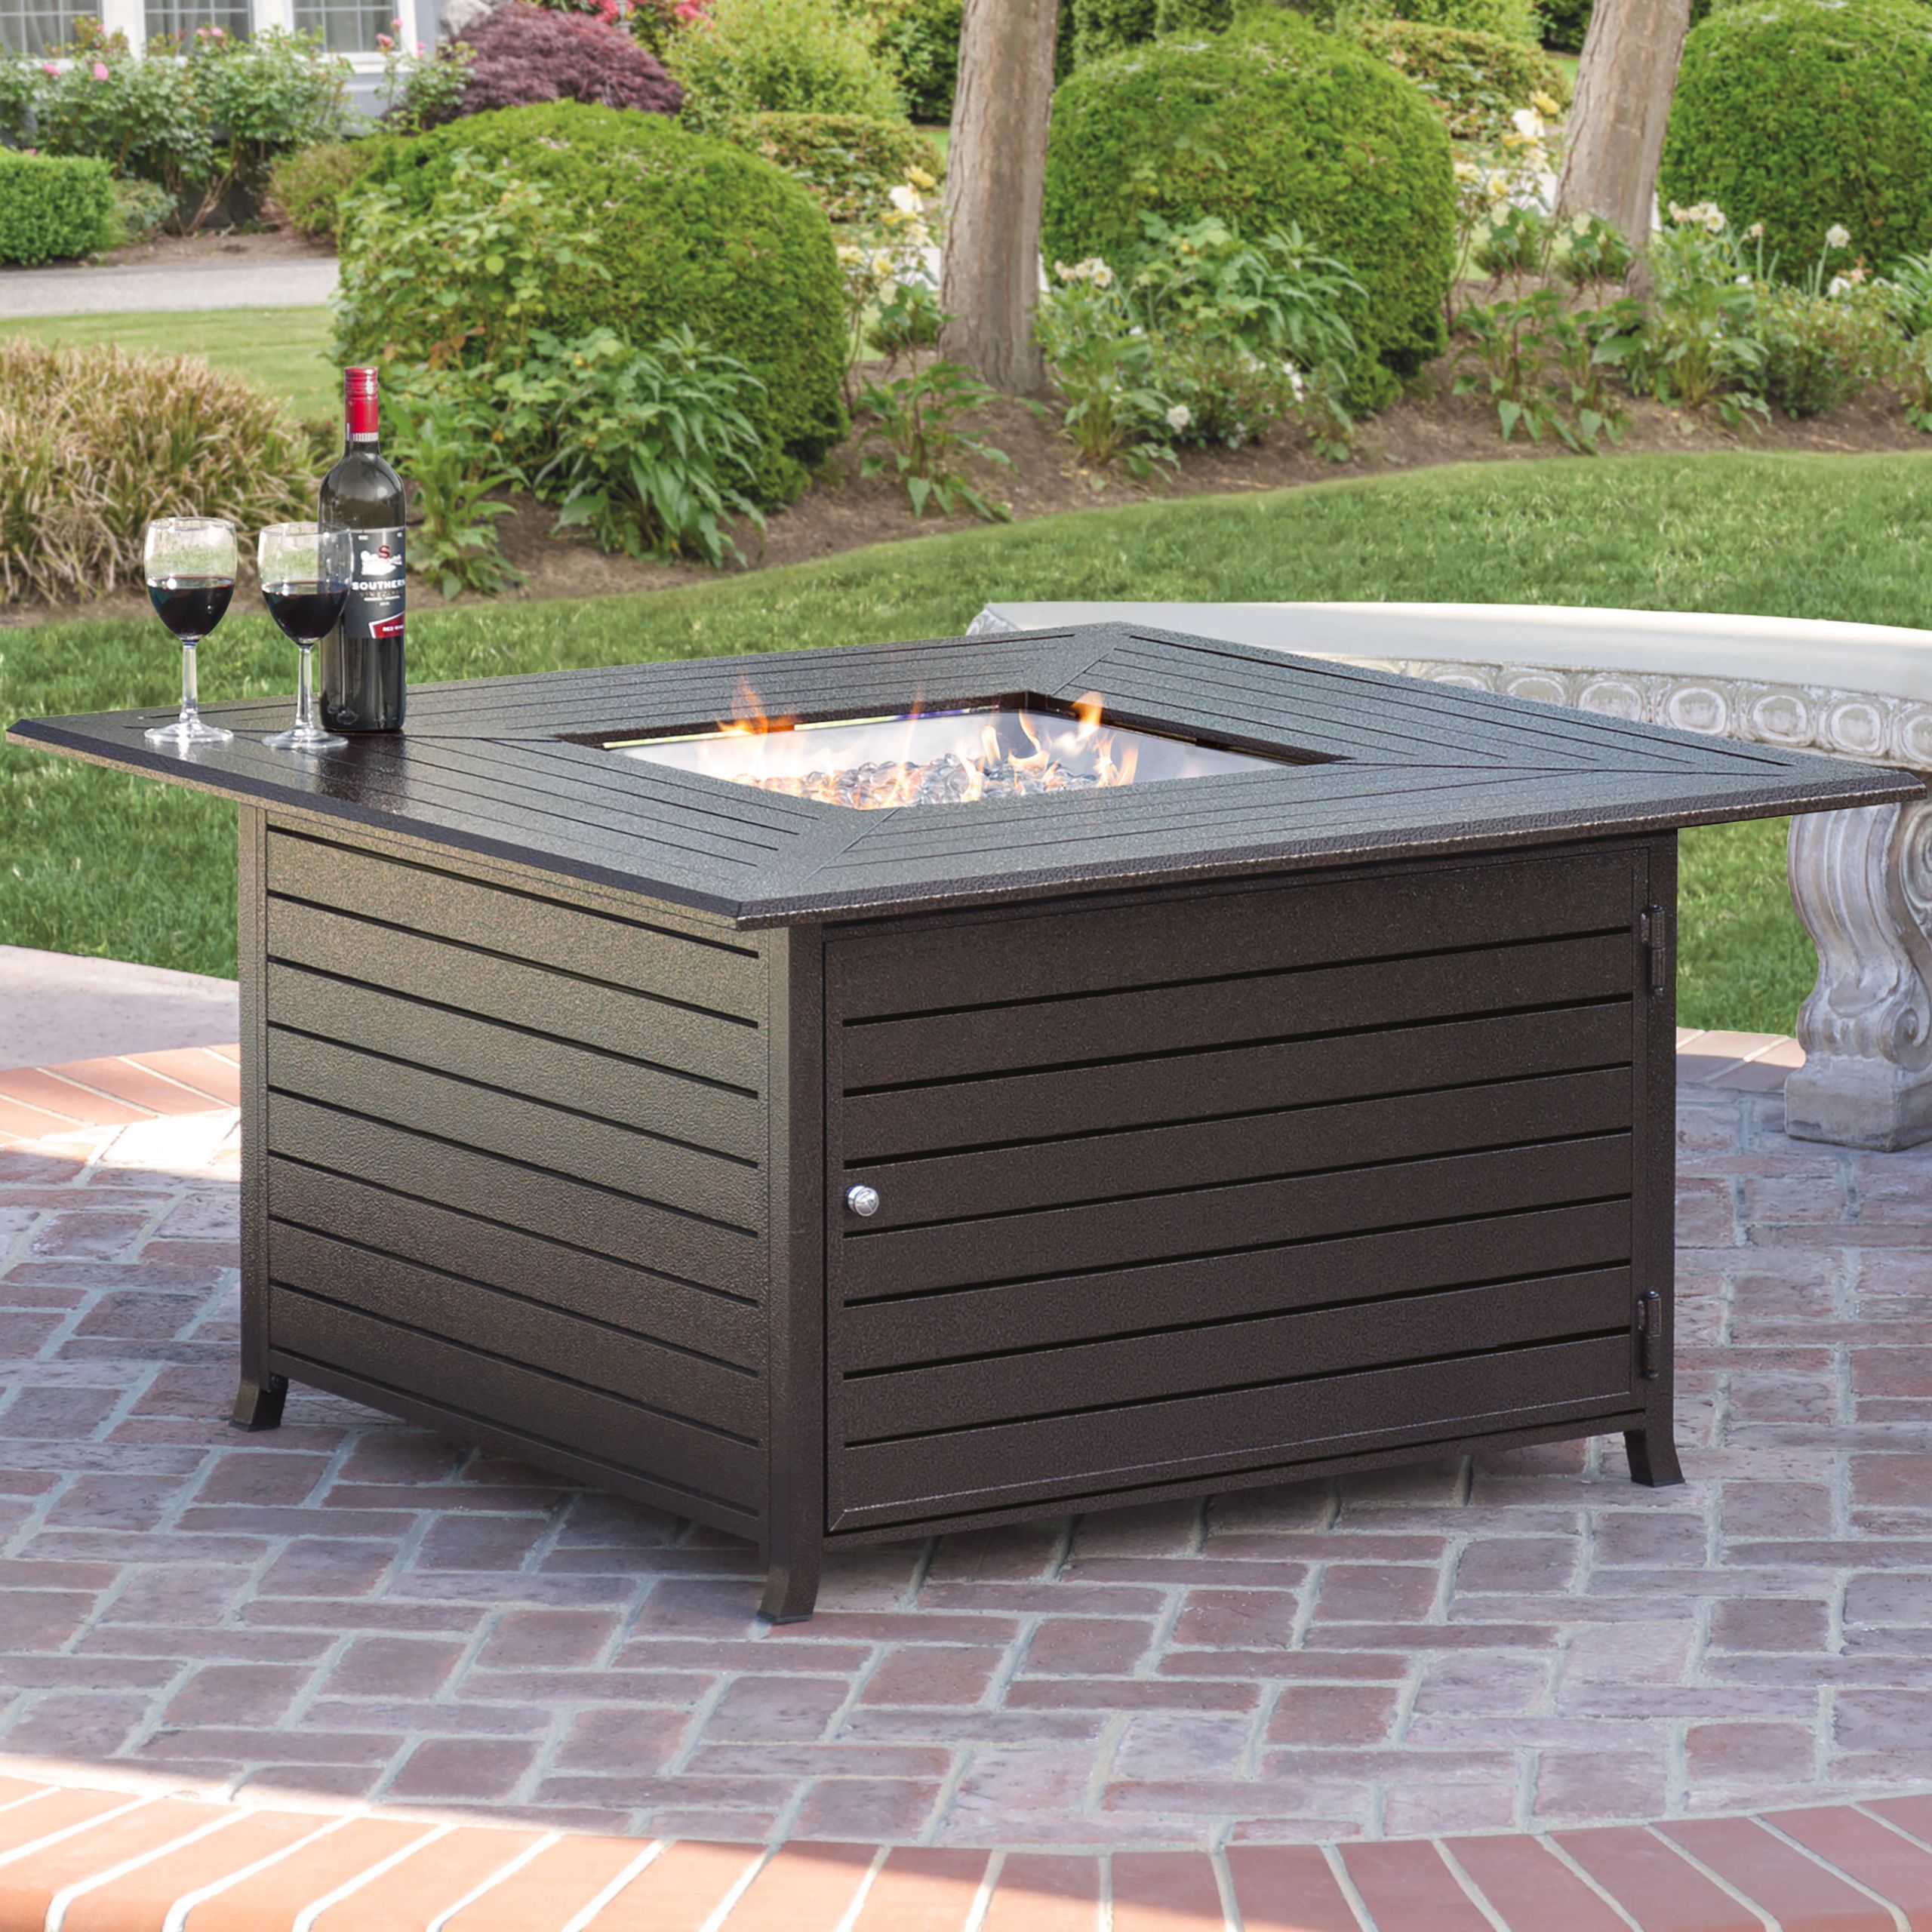 Outdoor Fire Pit Table
 Best Choice Products Extruded Aluminum Gas Outdoor Fire